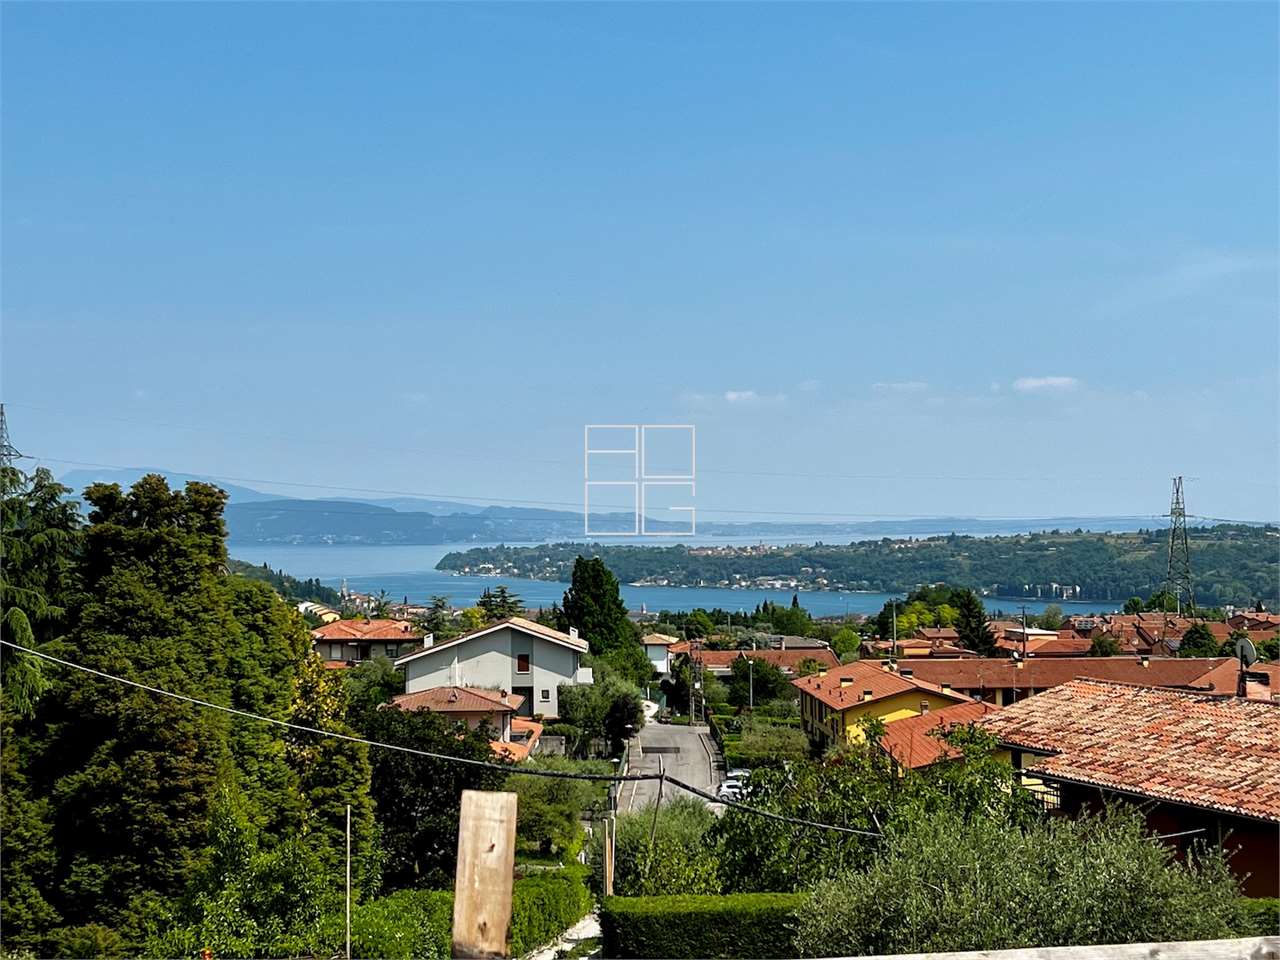 New villas with lake view in Salò